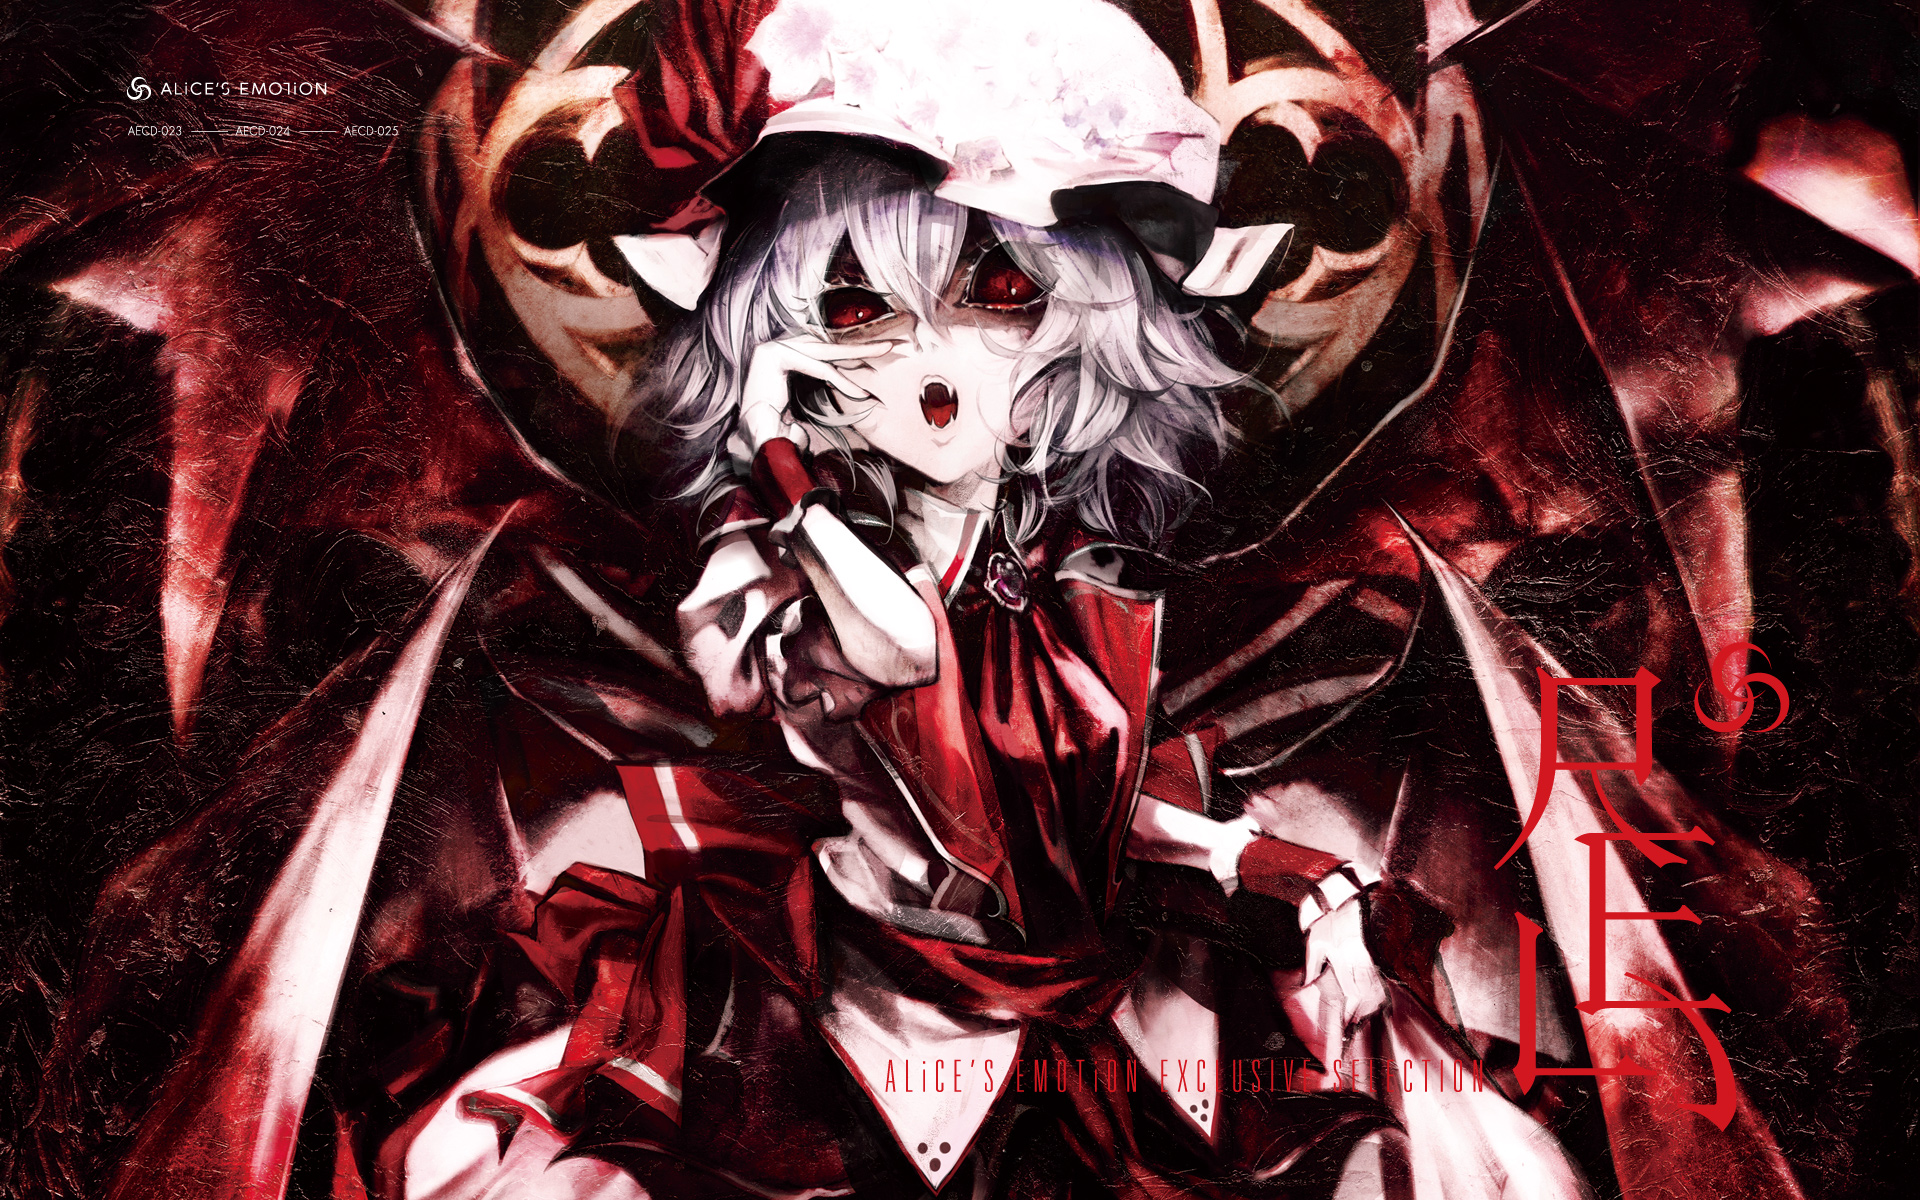 Anime character, Remilia Scarlet from Touhou, in a captivating desktop wallpaper by banpai akira.